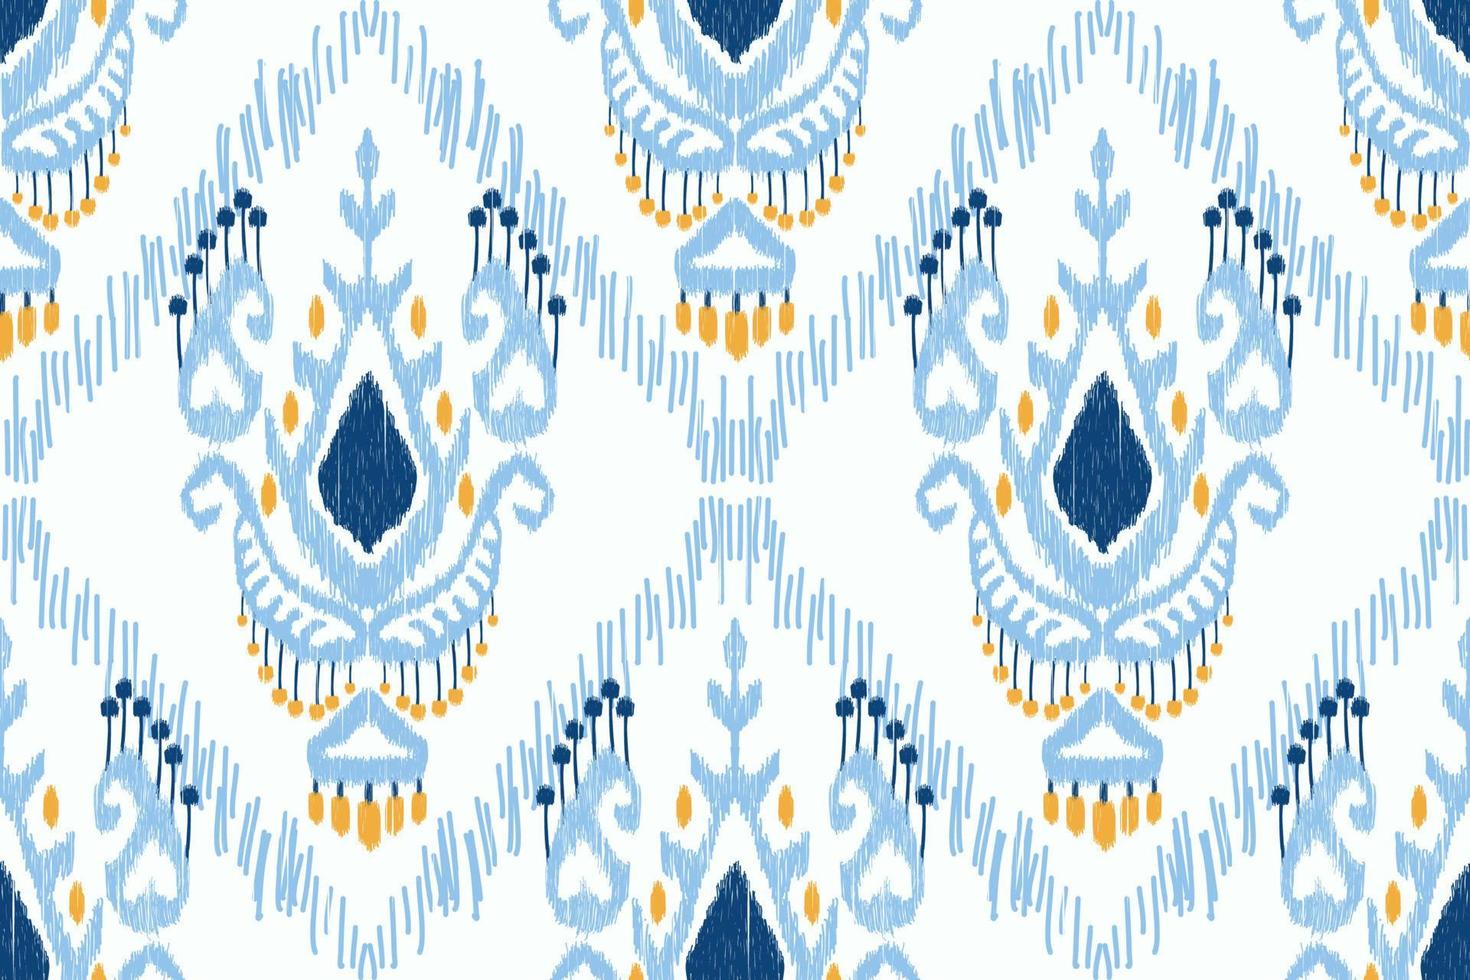 Ikat floral paisley embroidery on white background.geometric ethnic oriental seamless pattern traditional.Aztec style abstract vector illustration.design for texture,fabric,clothing,wrapping,carpet.